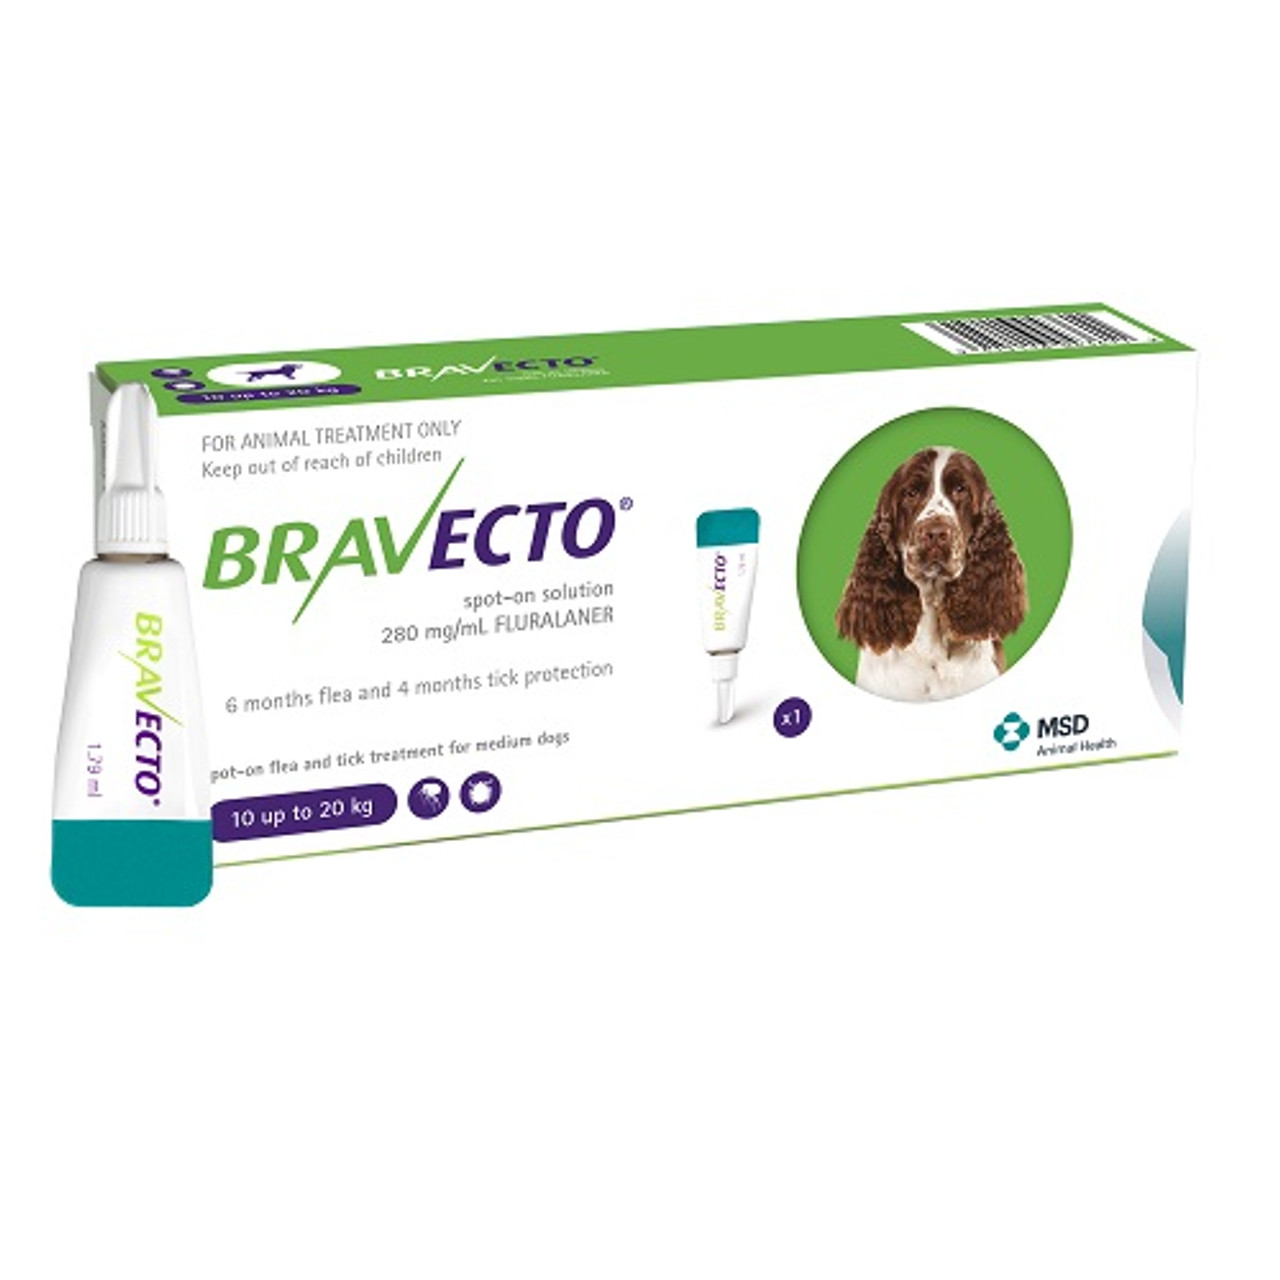 Bravecto Spot-On 500mg for Medium Dogs >1020 kg (22-44 lbs)